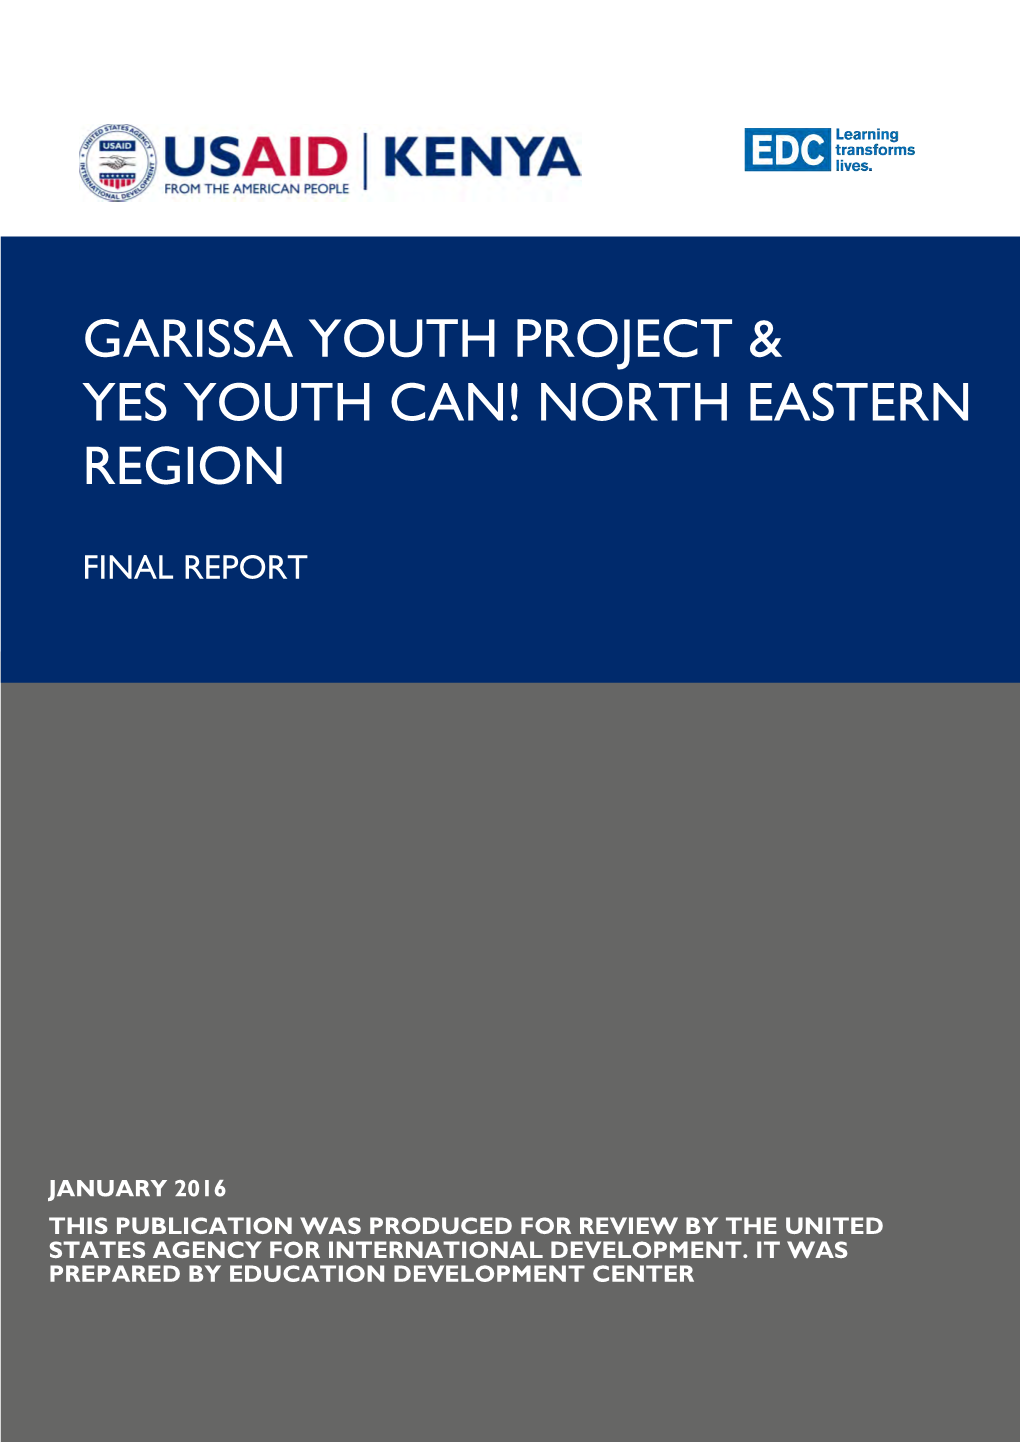 Garissa Youth Project & Yes Youth Can! North Eastern